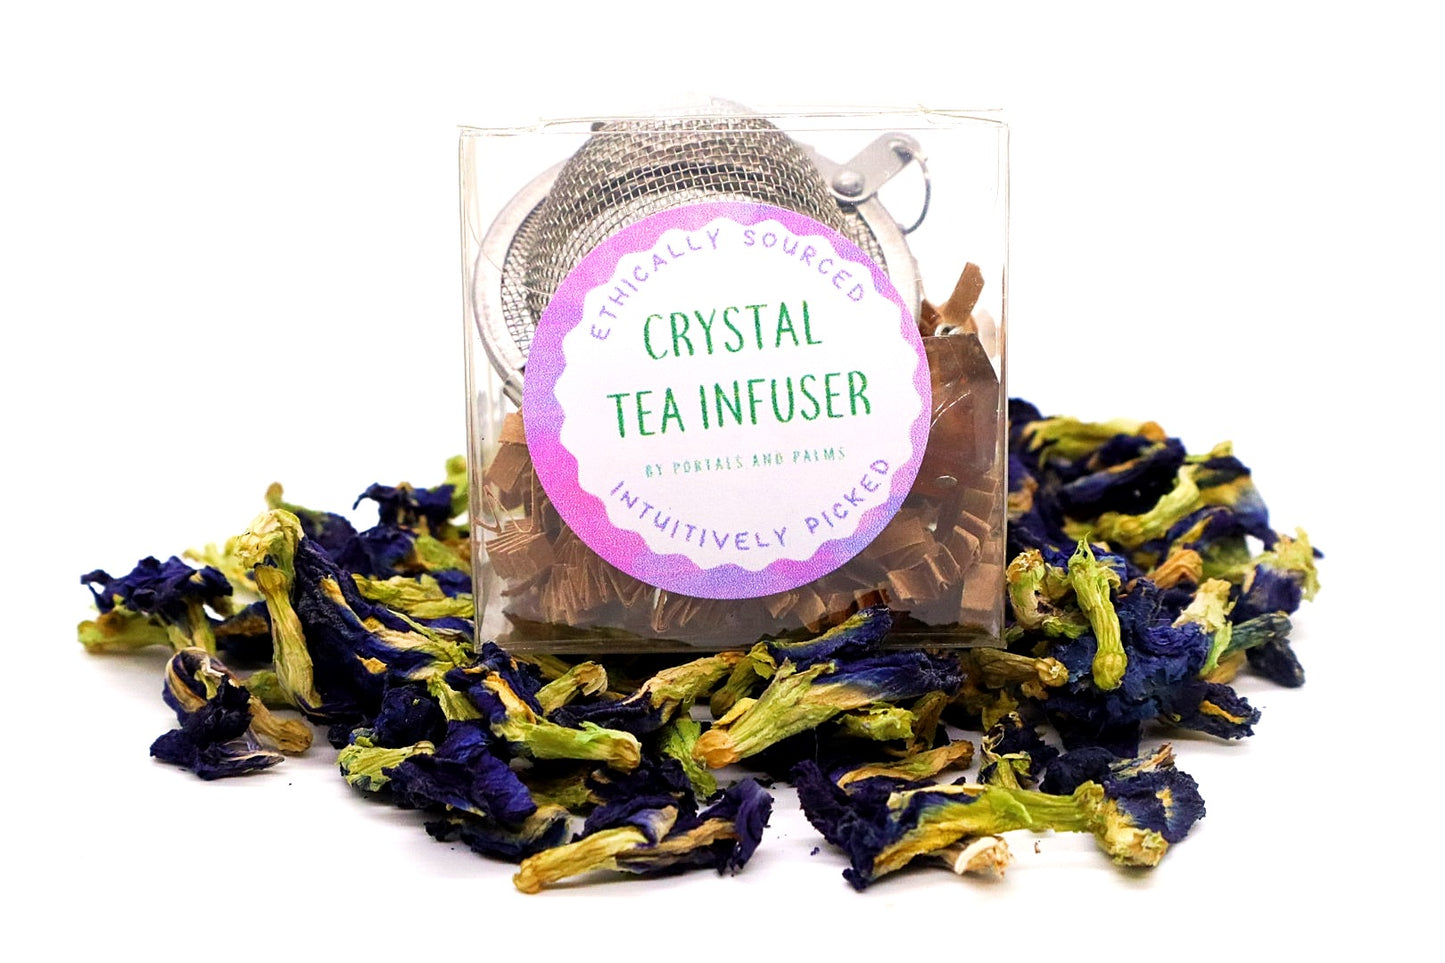 Crystal Tea Infuser - Portals and Palms